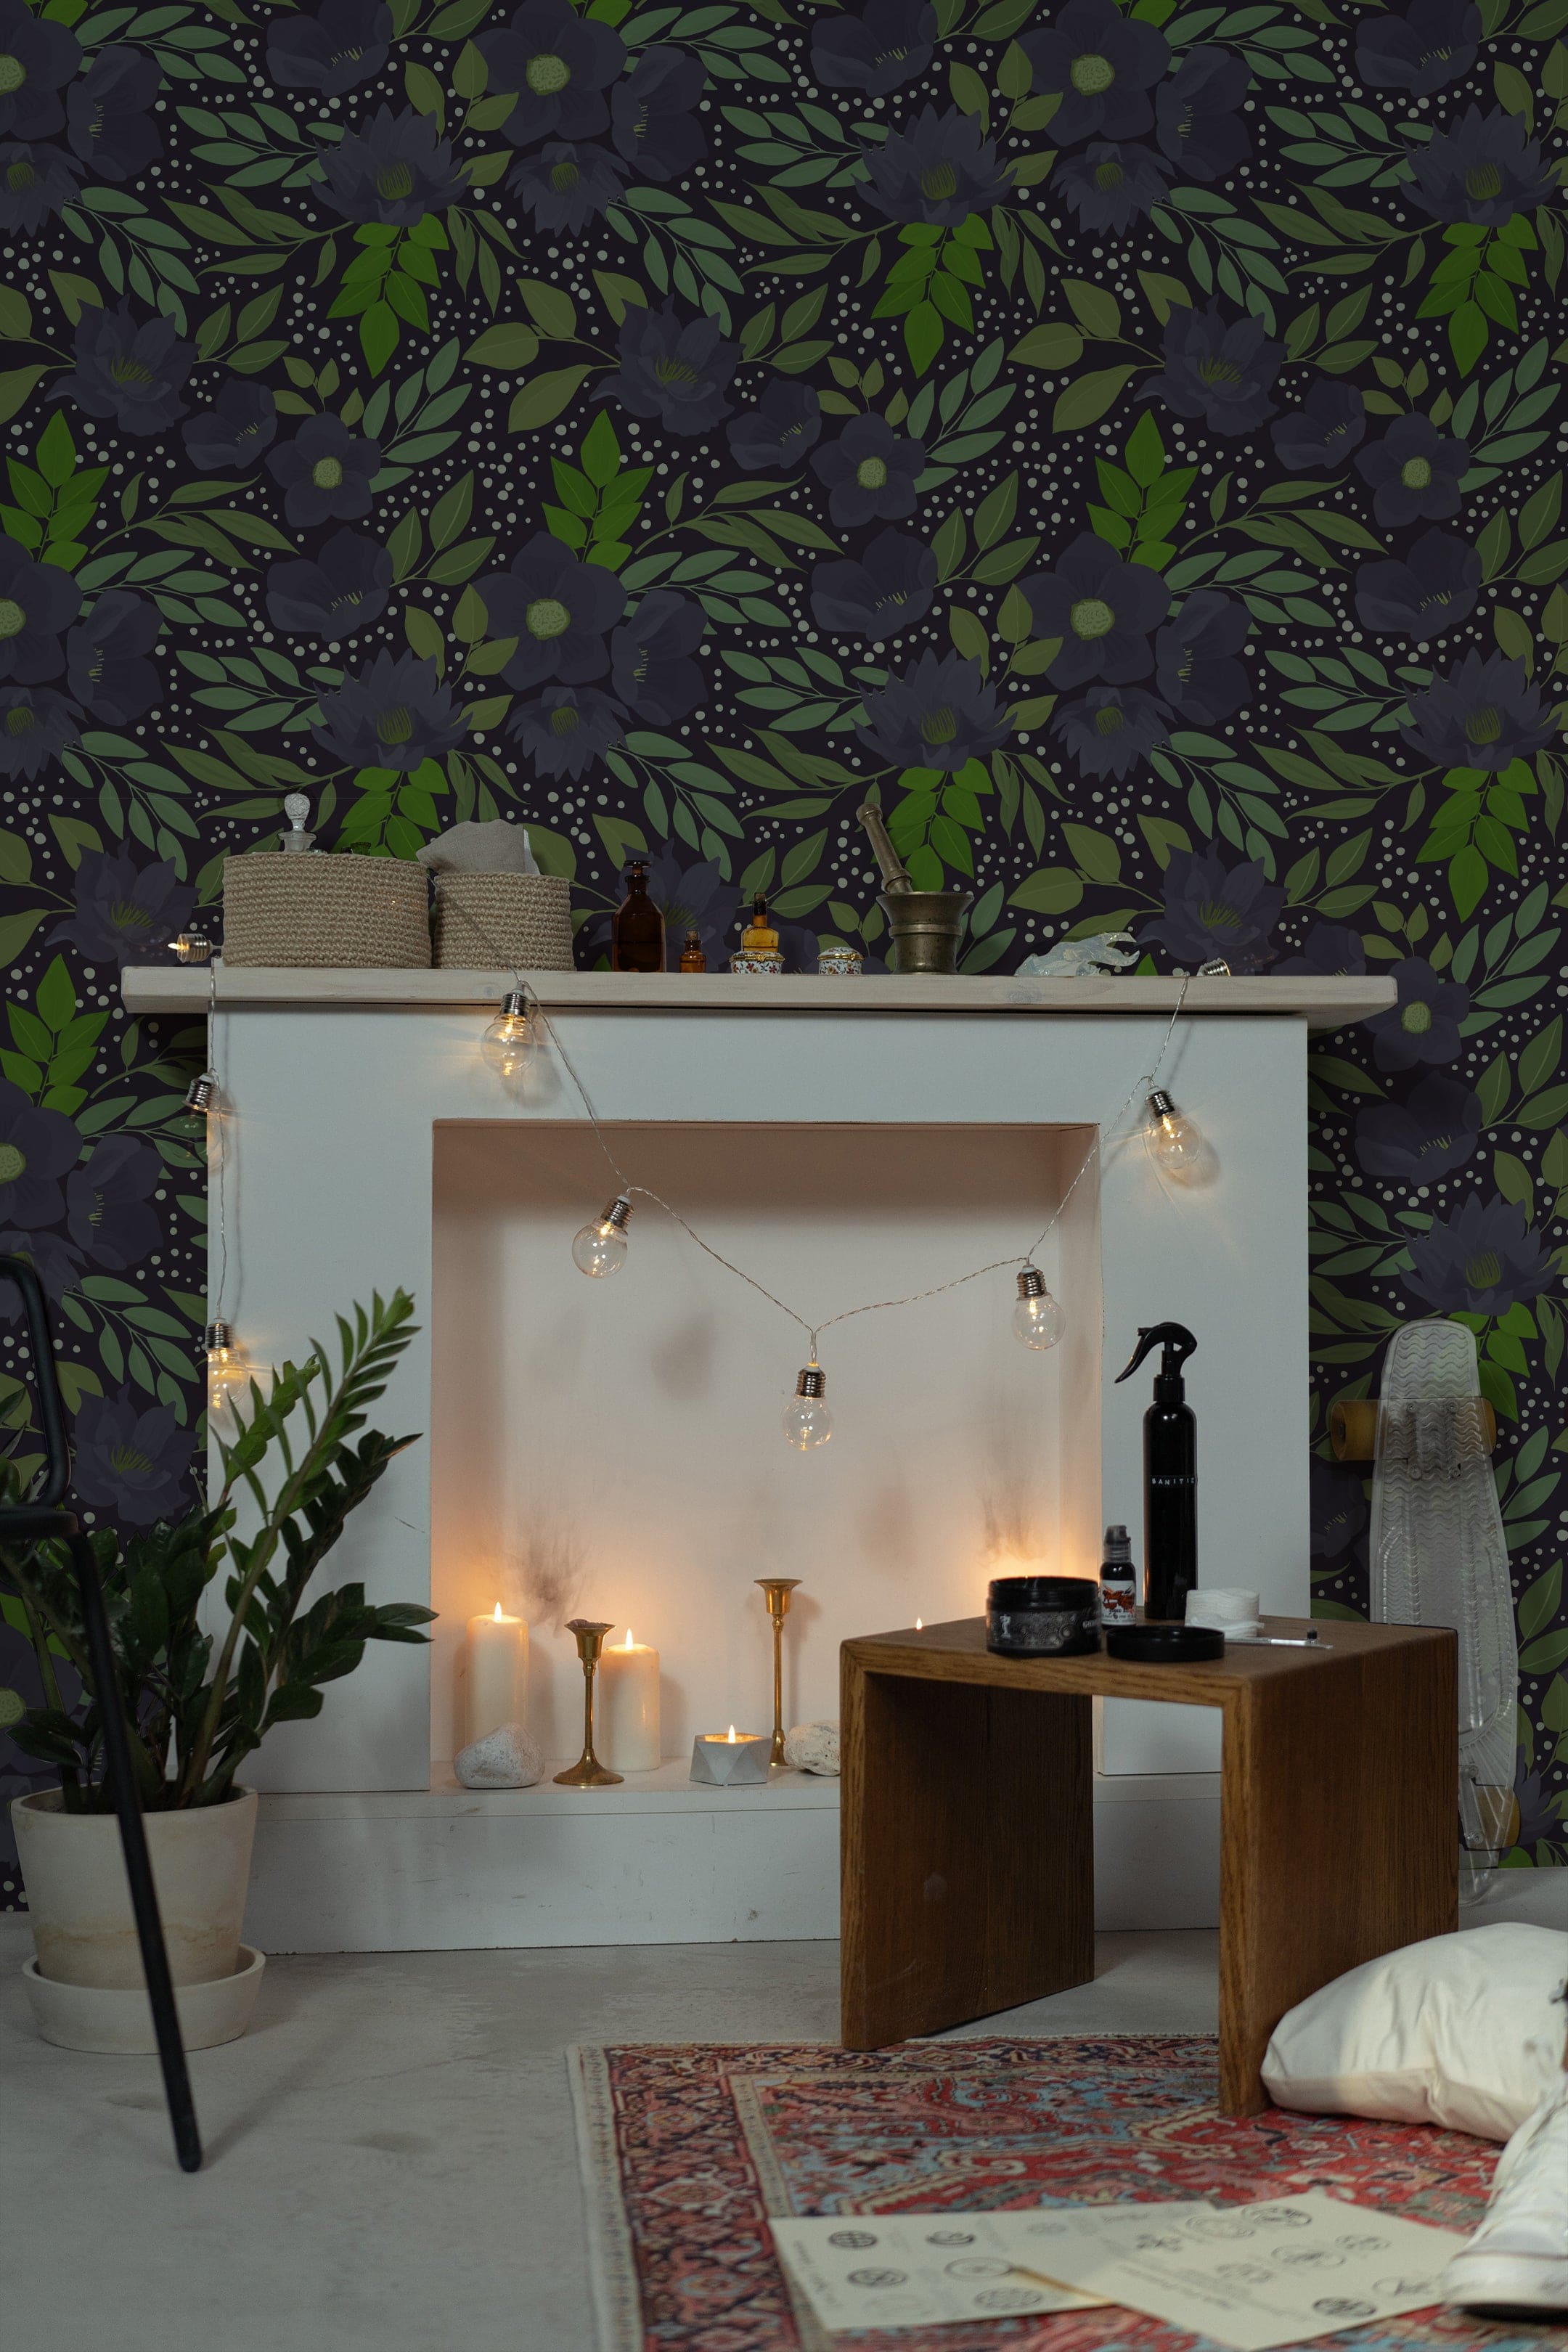 A cozy, warmly lit living area featuring the Martinique Floral Wallpaper, characterized by its large-scale dark purple flowers and lush green leaves on a dark background. The wallpaper creates a bold statement while providing a backdrop to a serene space decorated with candles and string lights.